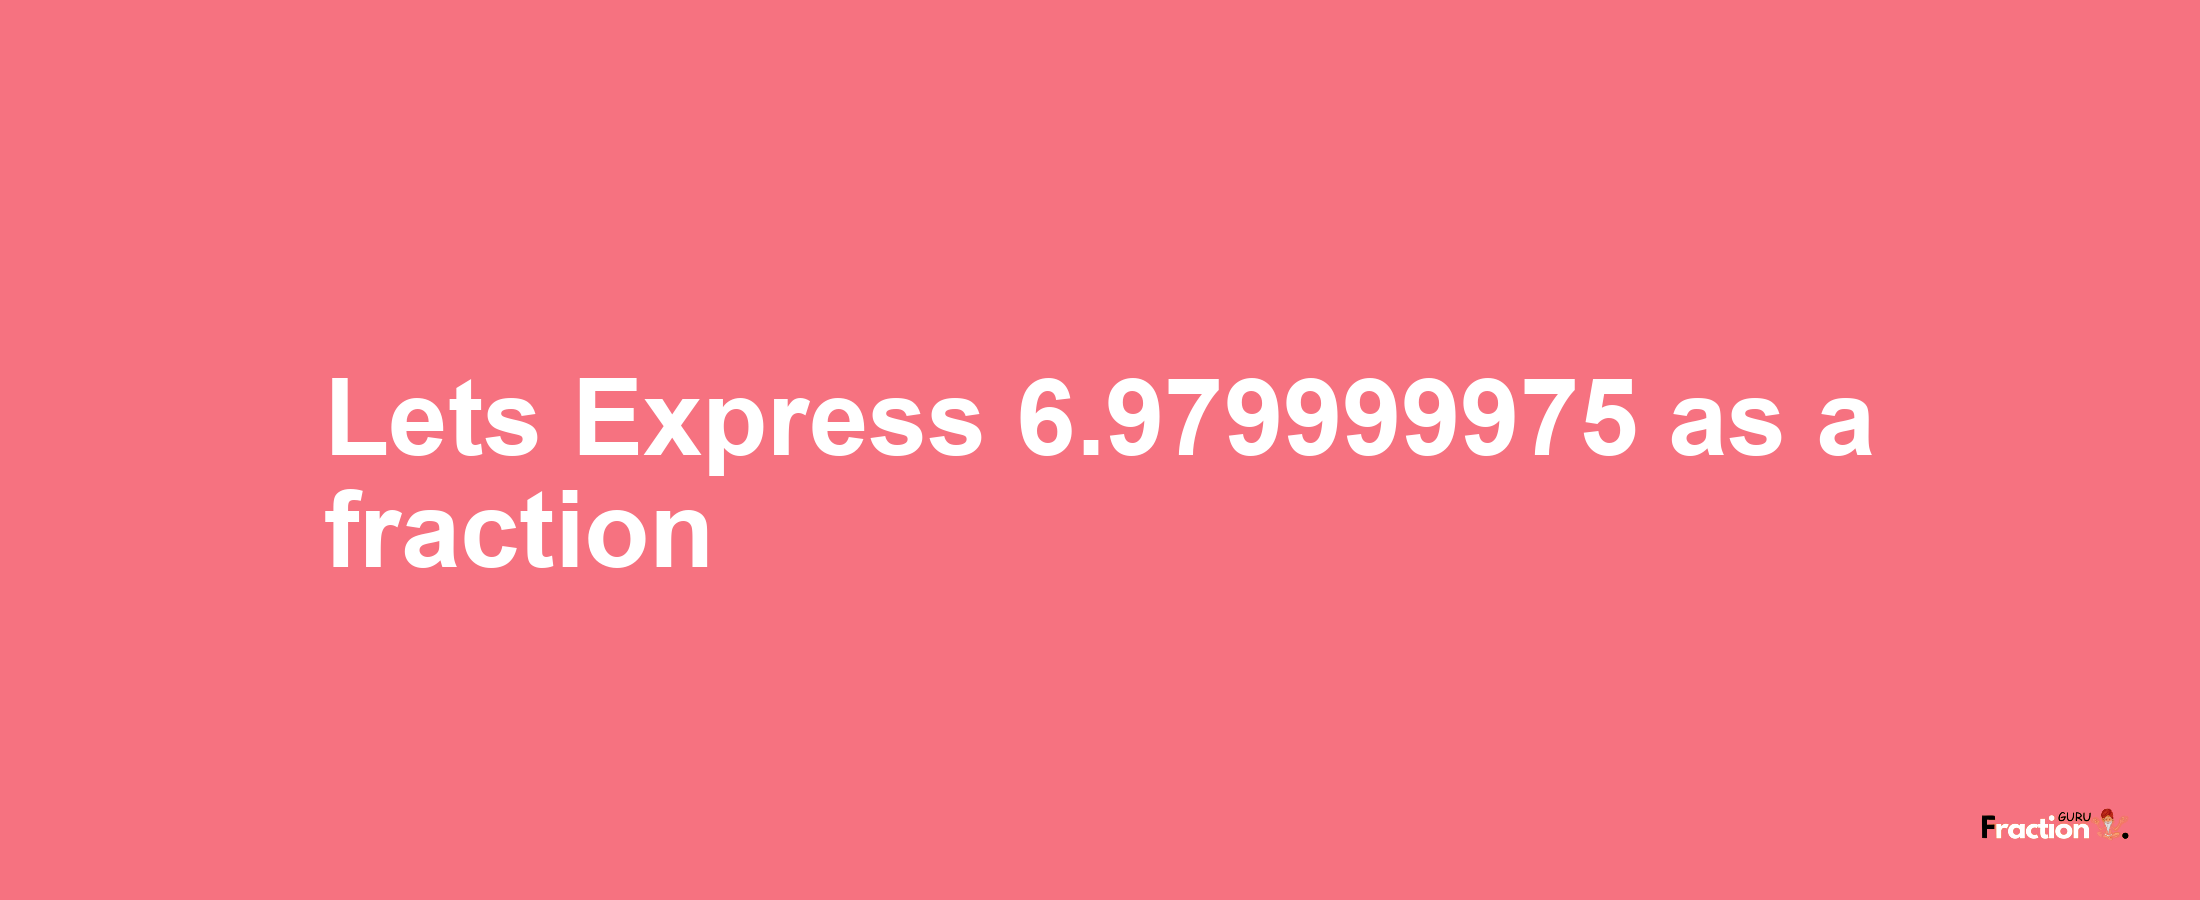 Lets Express 6.979999975 as afraction